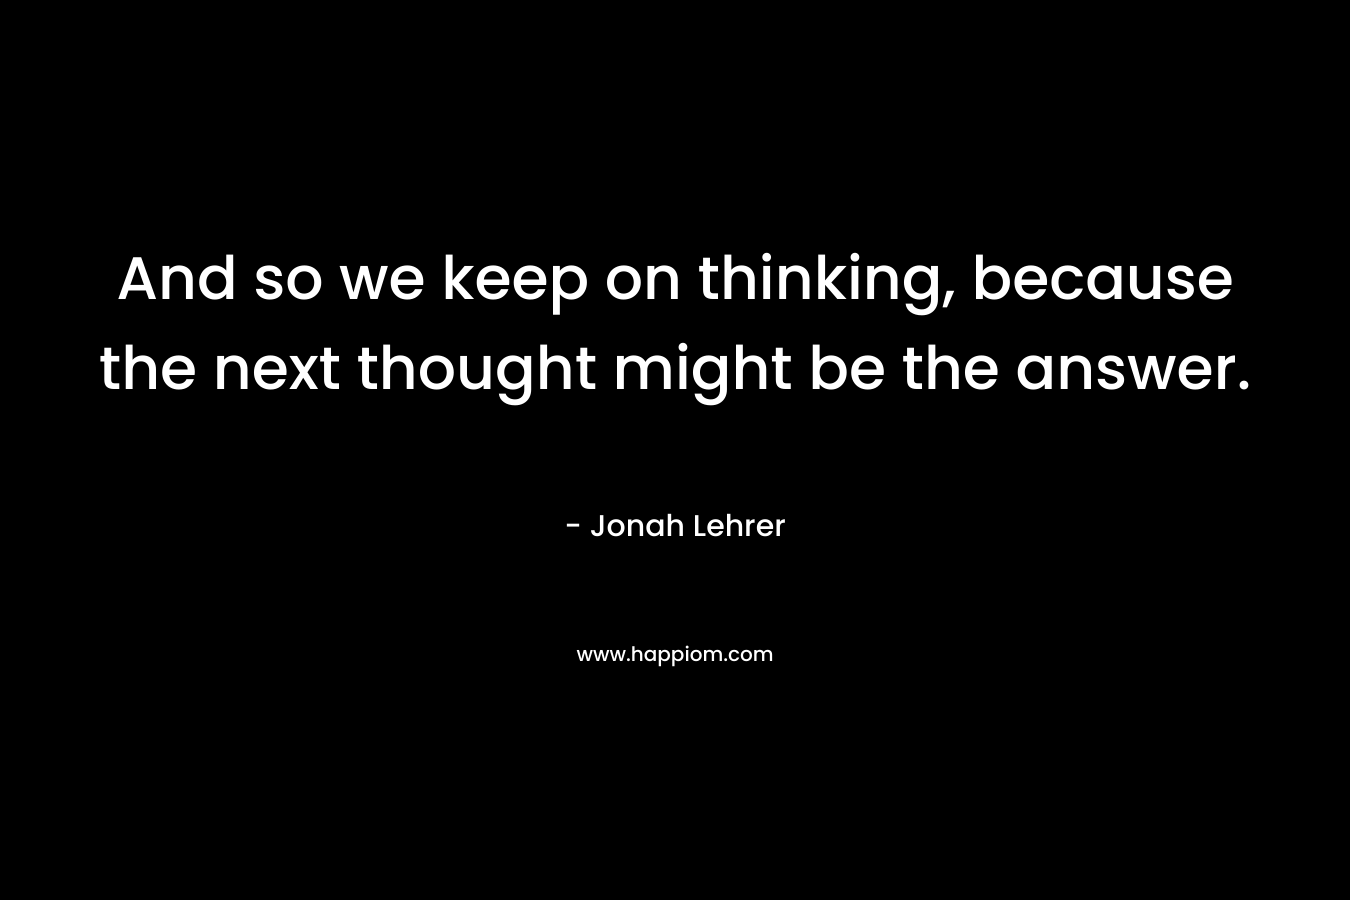 And so we keep on thinking, because the next thought might be the answer. – Jonah Lehrer